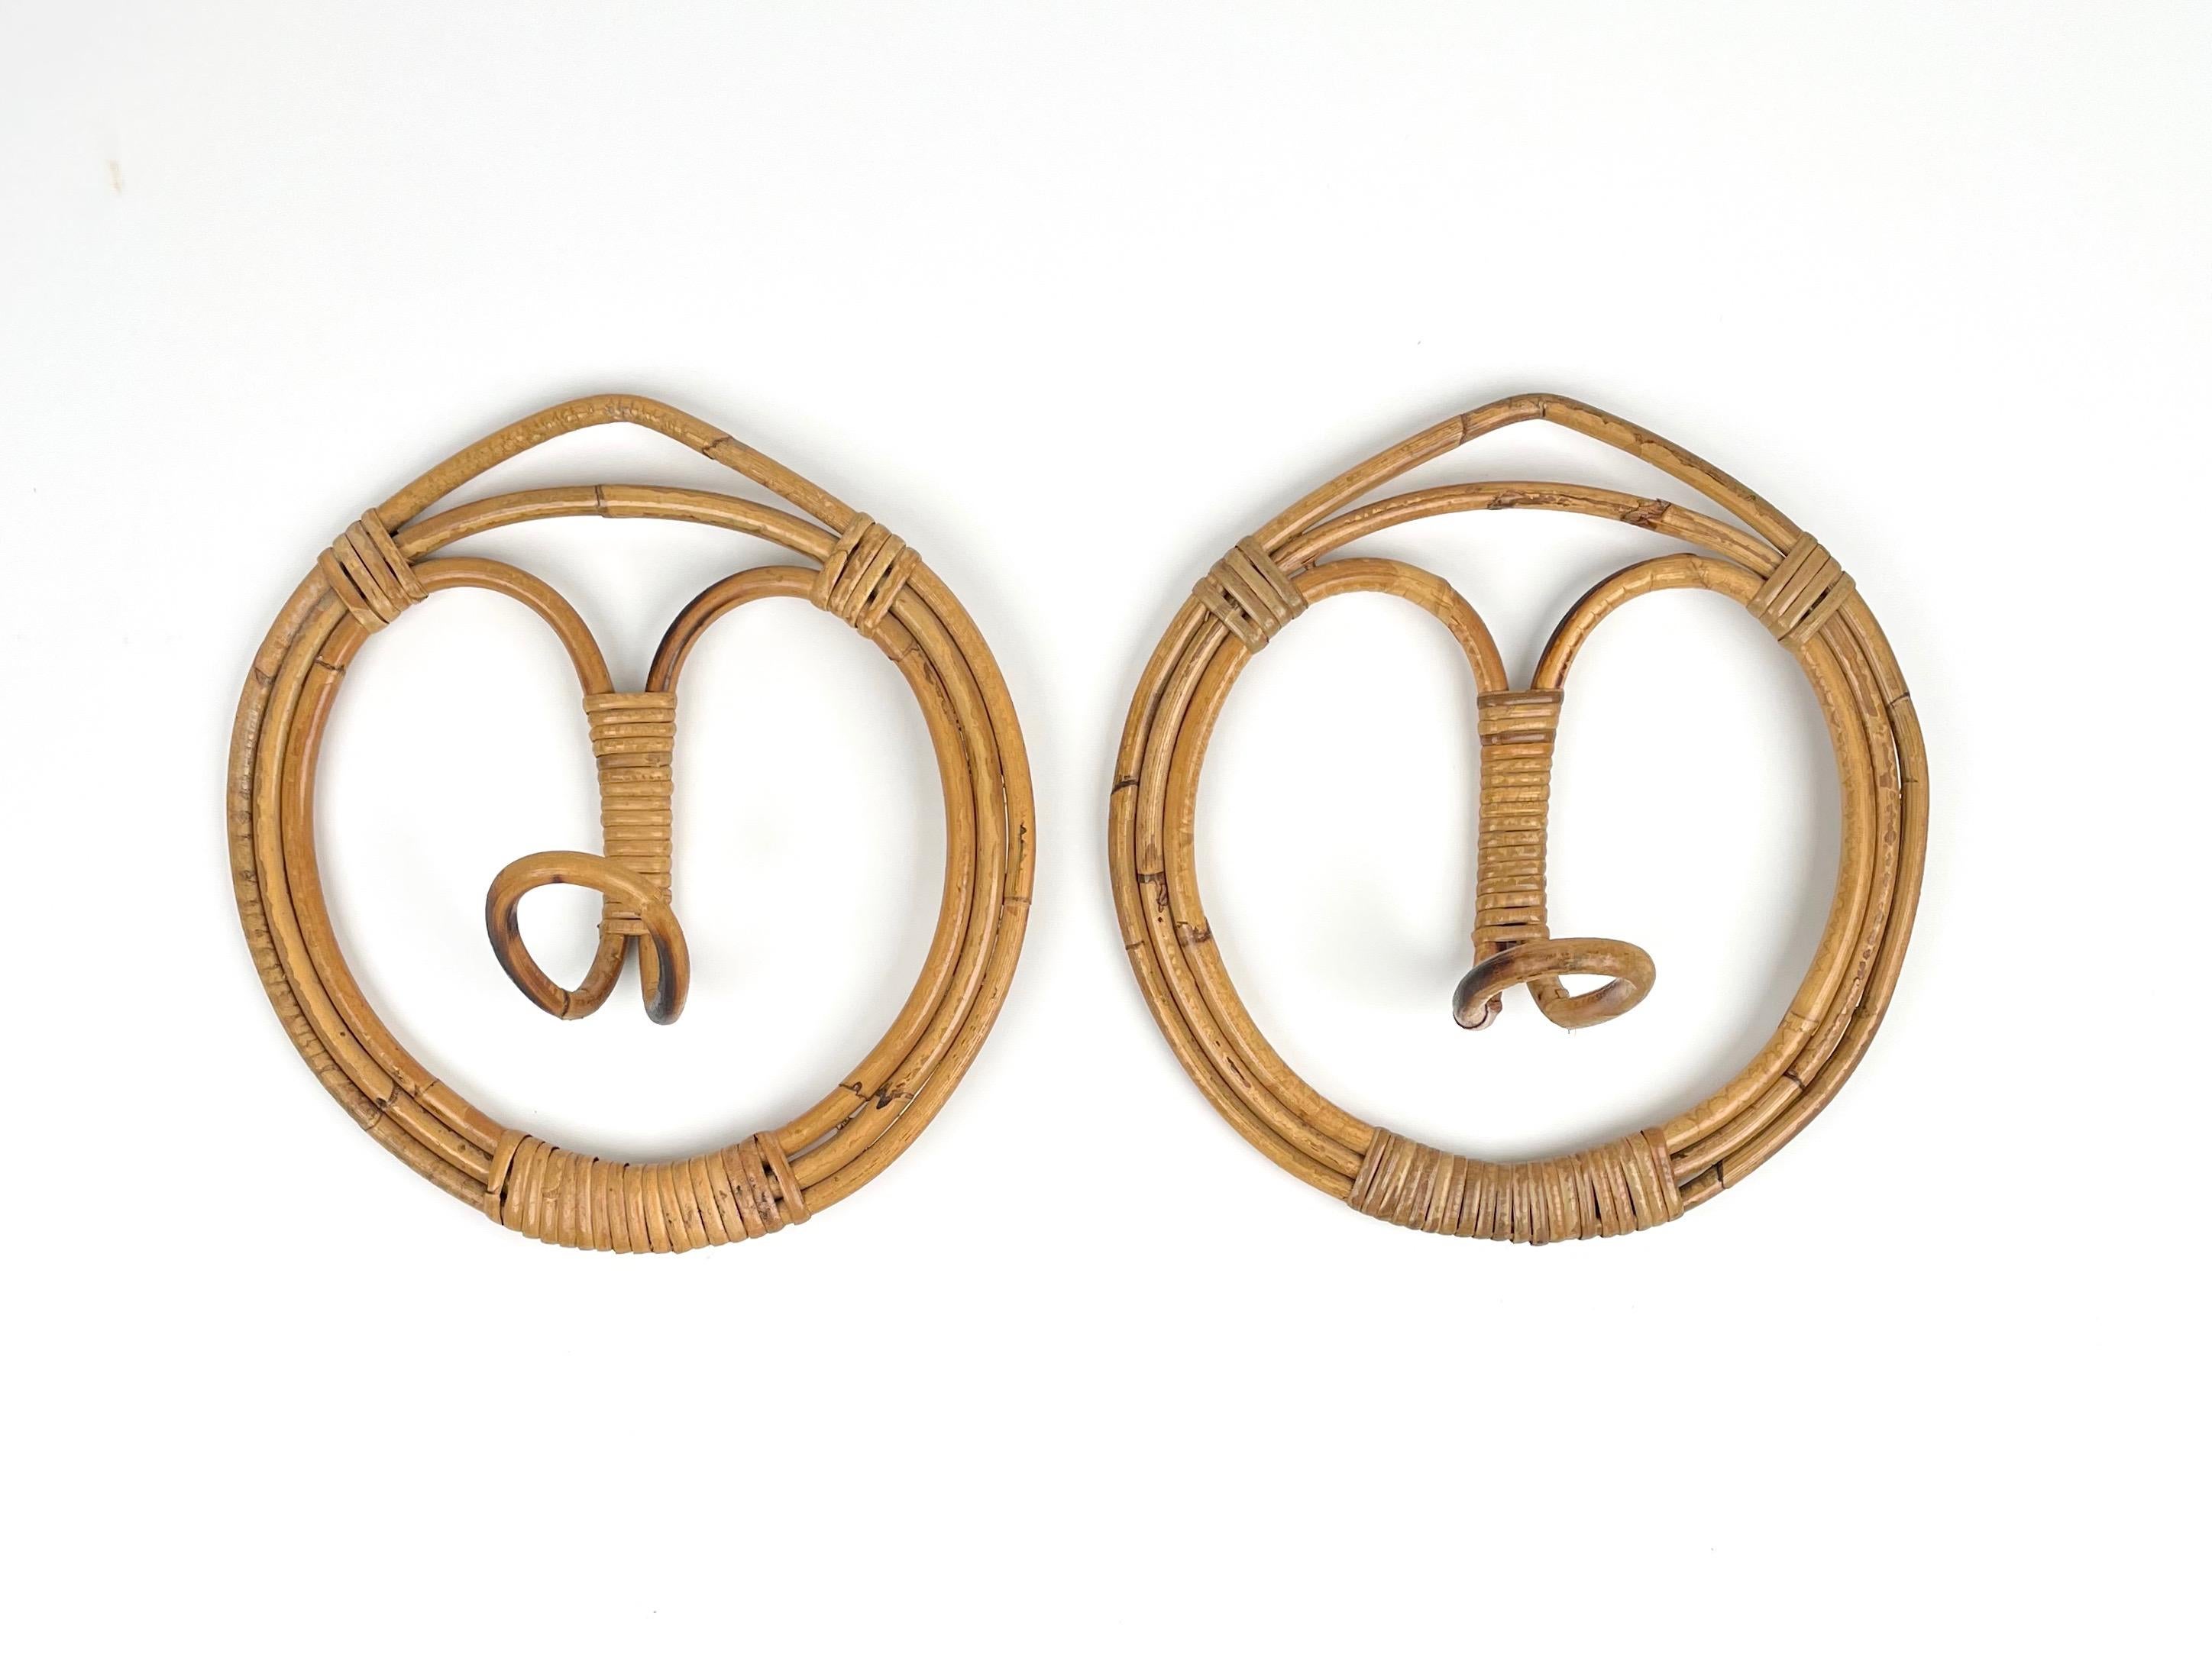 Pair of Midcentury modern round coat hangers in rattan and bamboo, single hook.

Made in Italy in the 1960s.